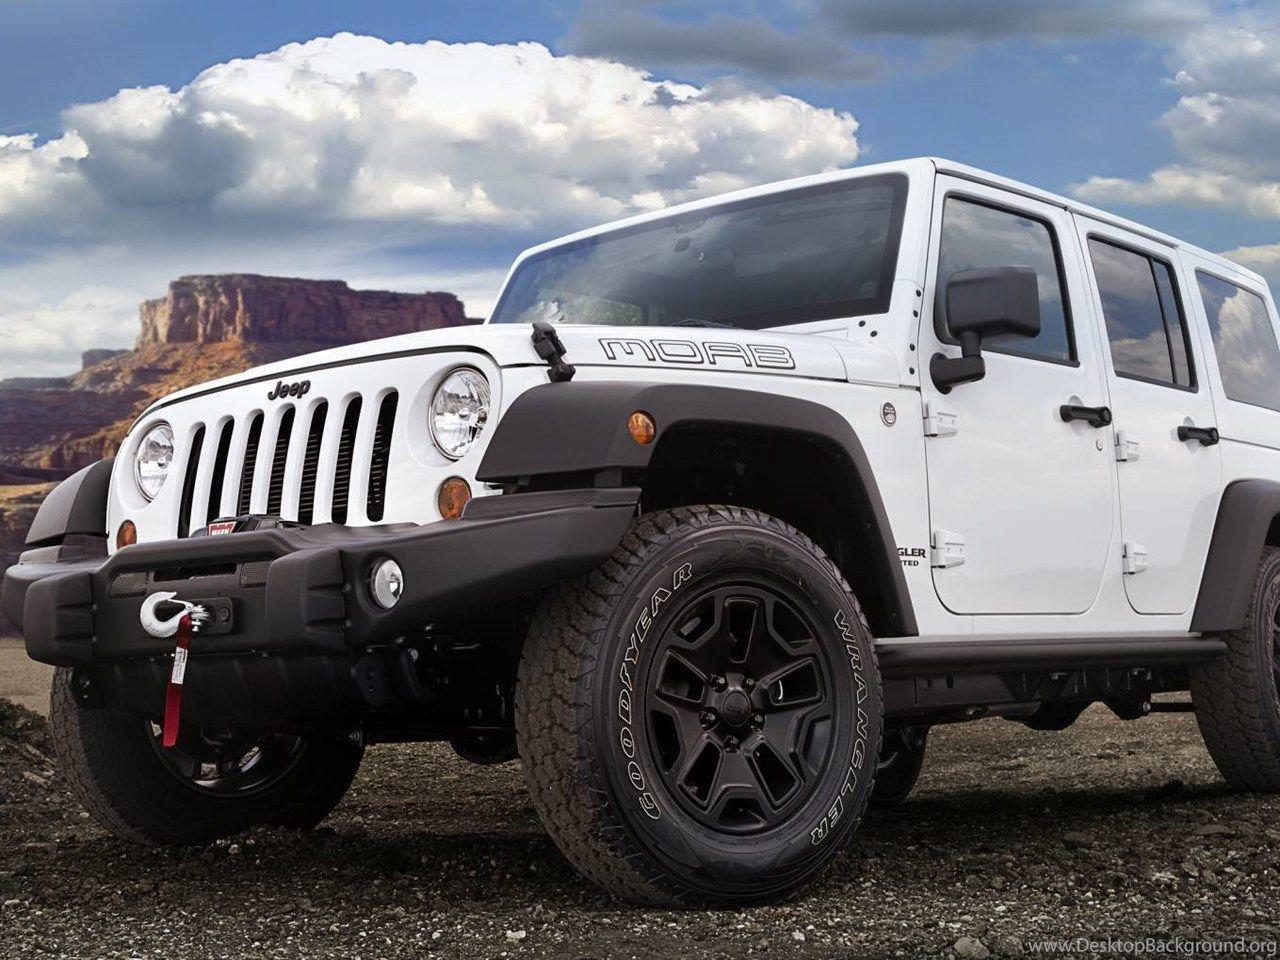 26+ Wallpaper Jeep Black And White Clipart full HD